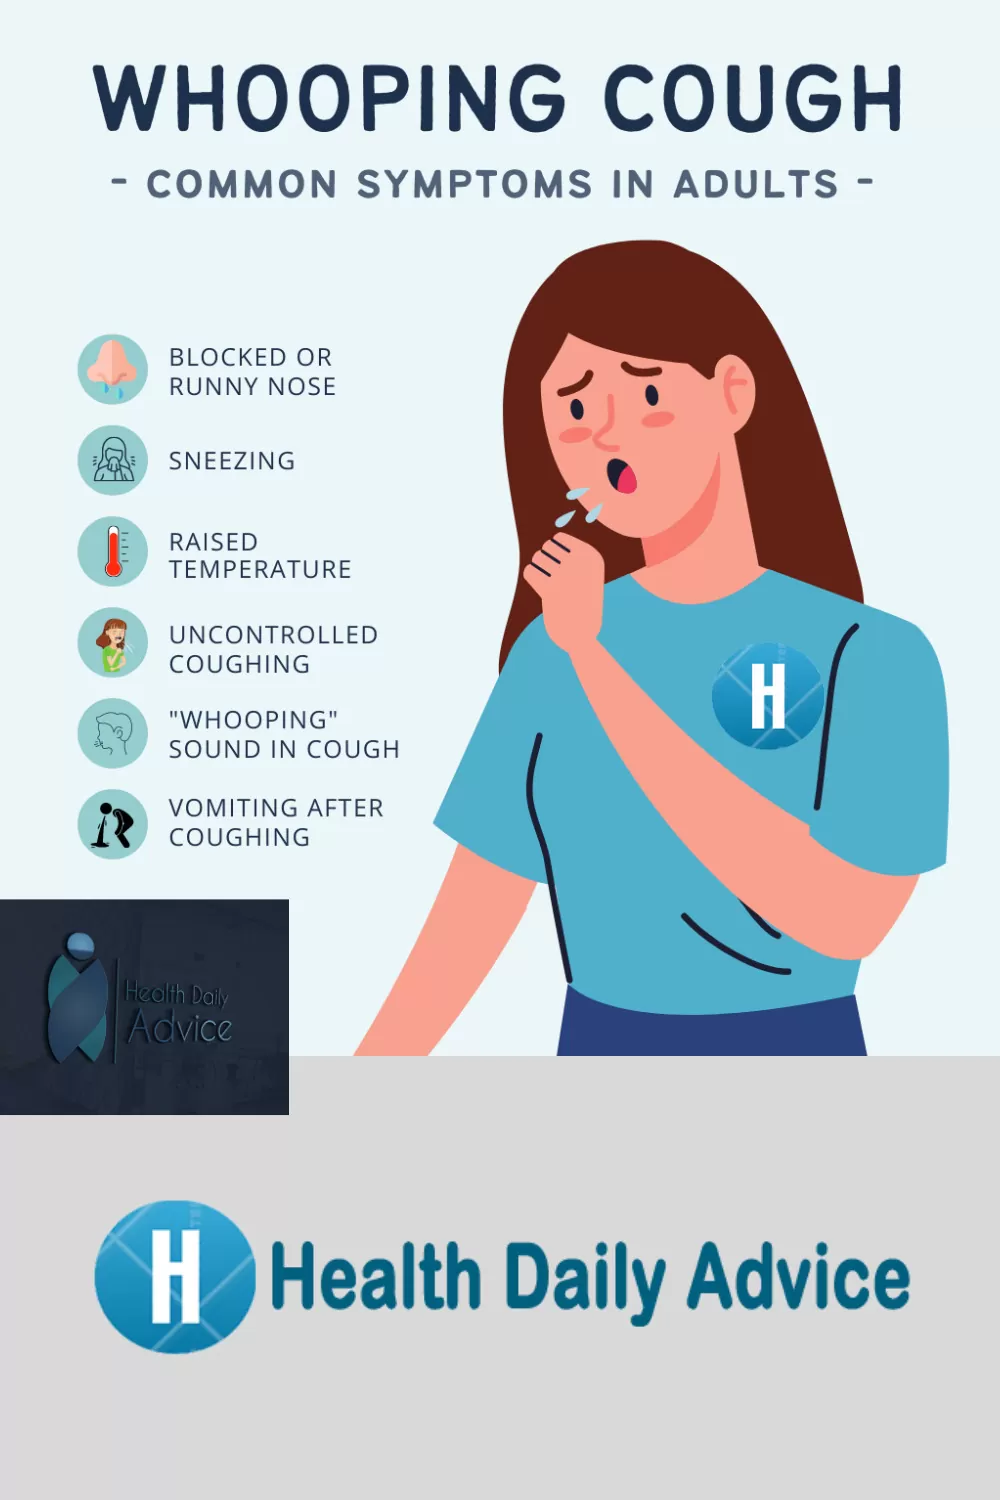 Symptoms of Whooping Cough in Adults